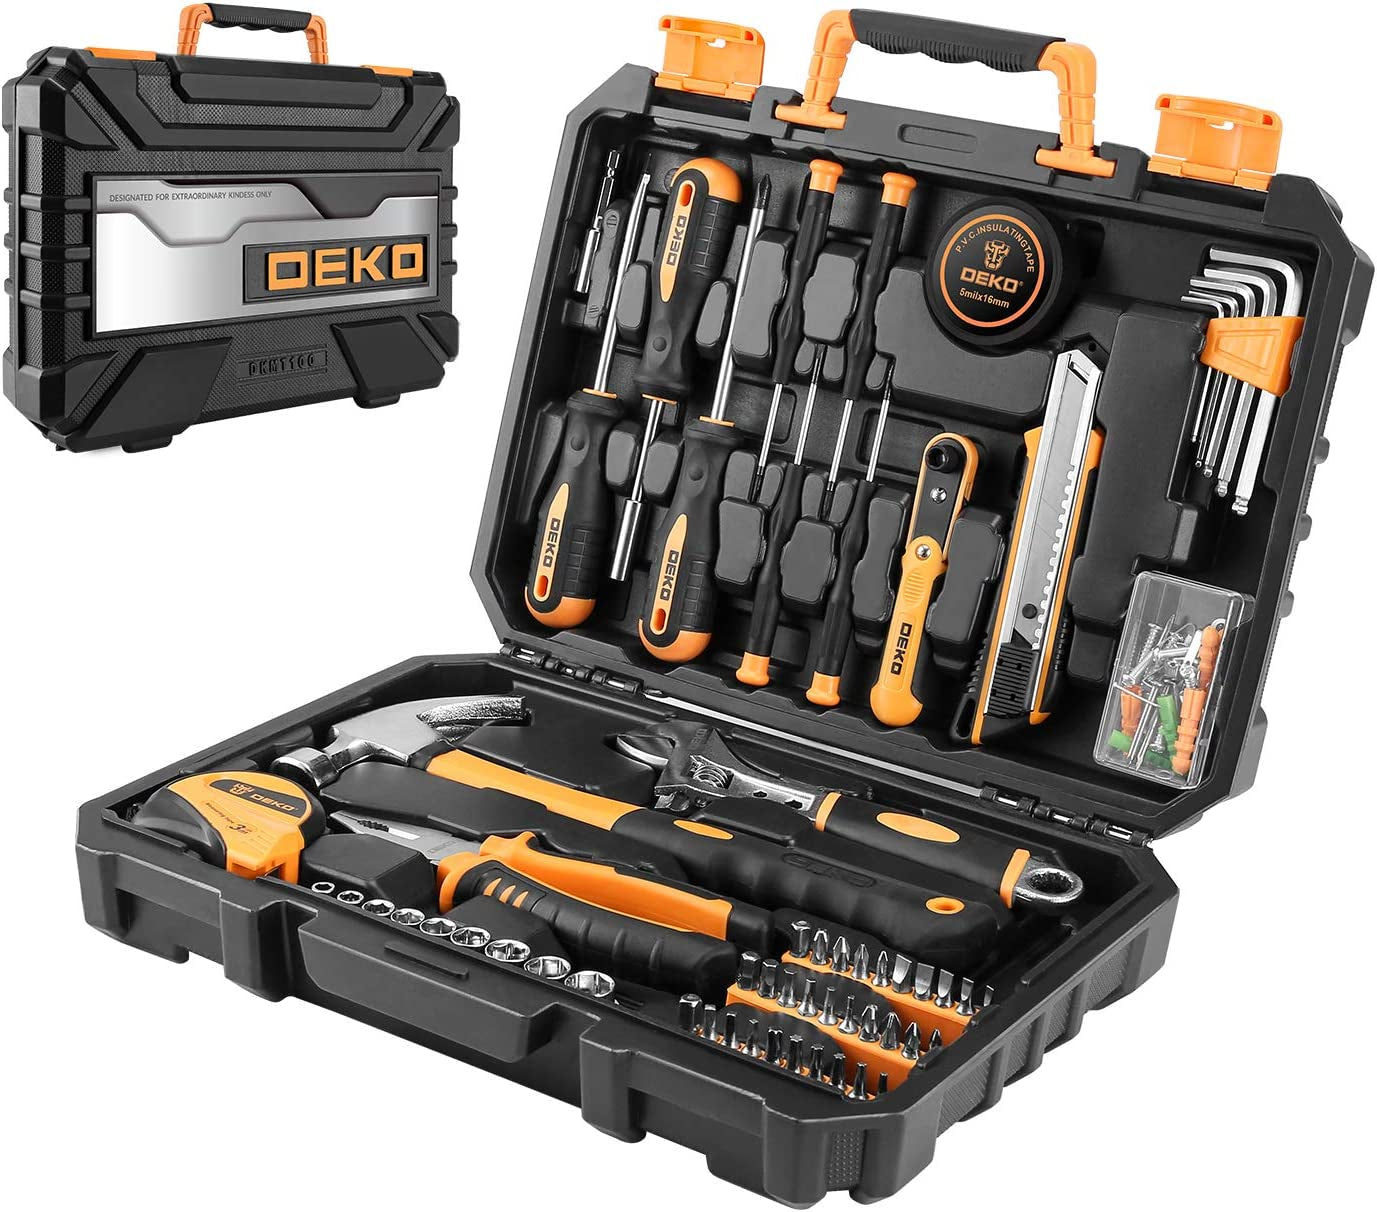 100 Piece Home Repair Tool Set,General Household Hand Tool Kit with Plastic Tool Box Storage